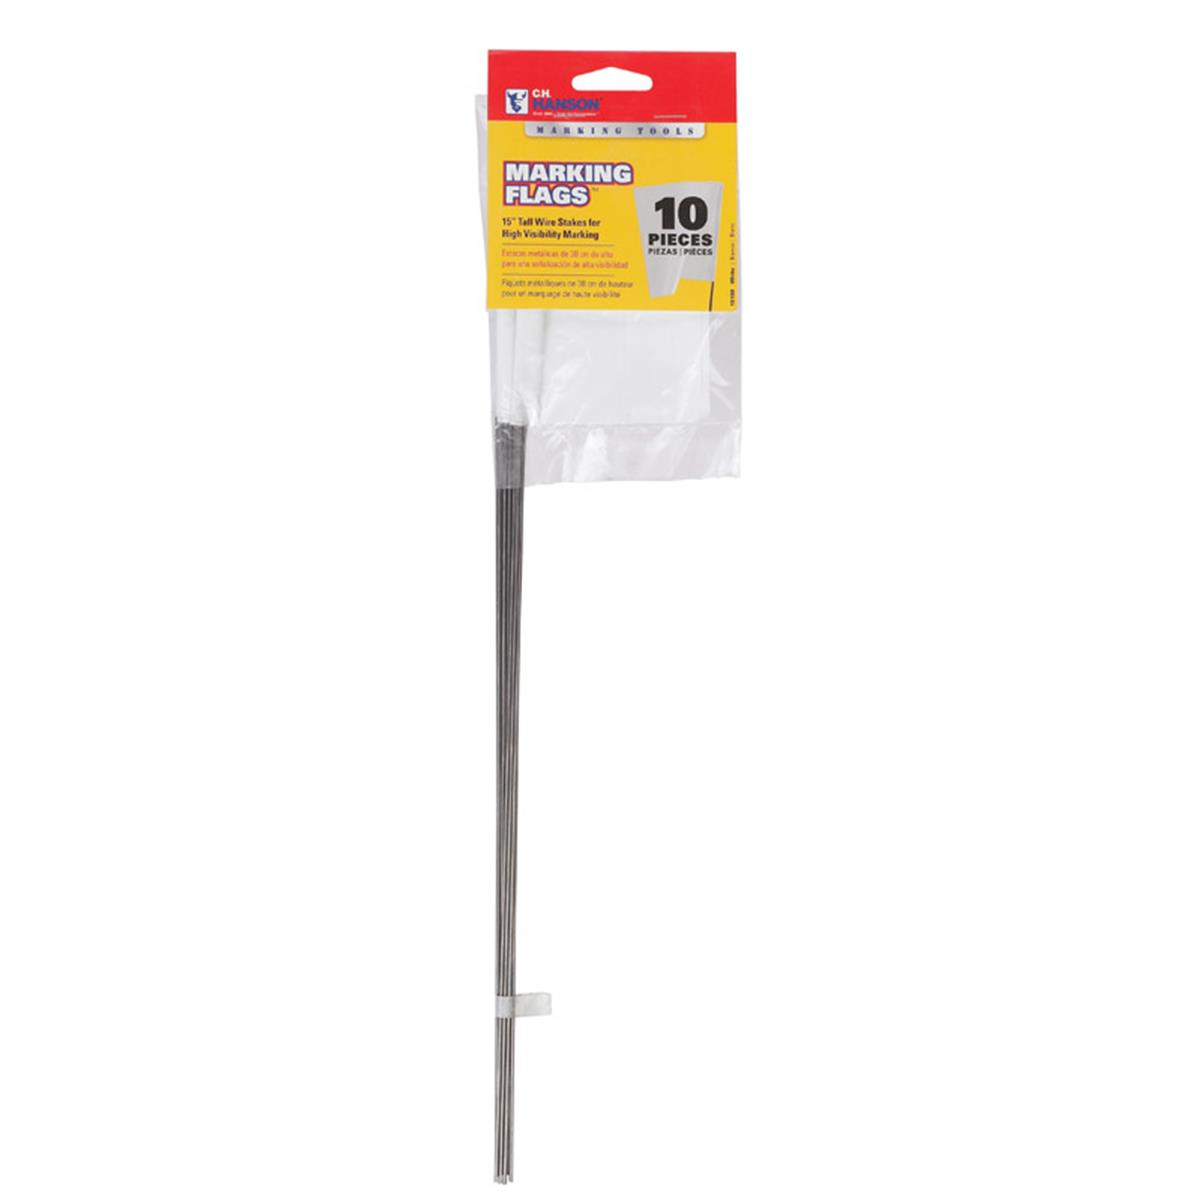 2198588 15 In. Marking Flags - White